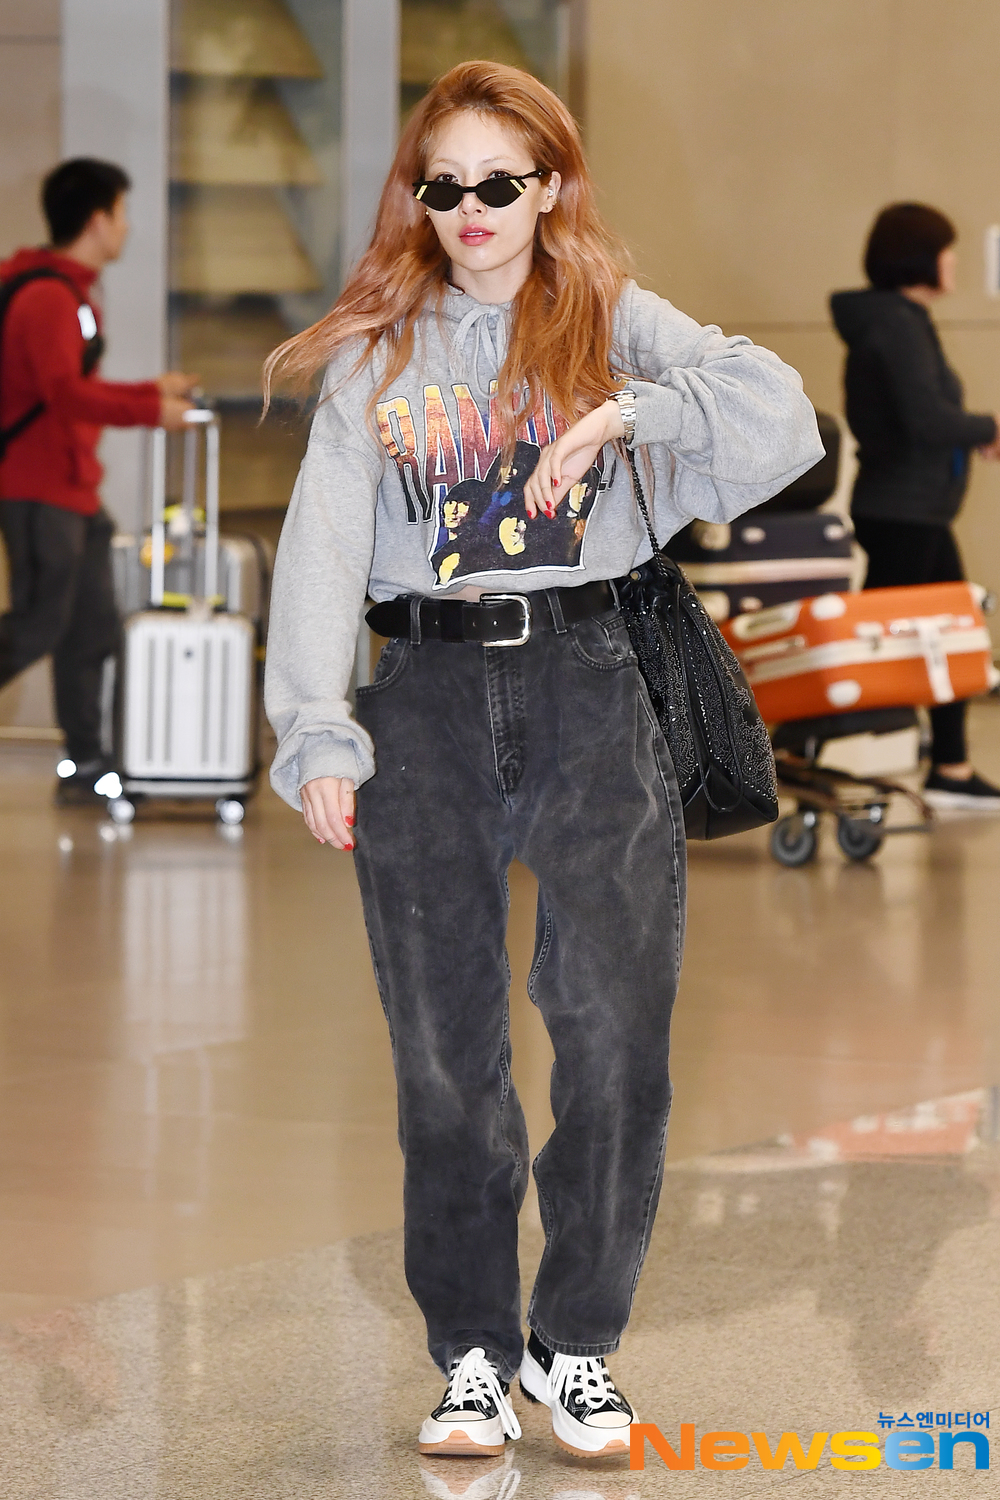 Singer Hyona (HyunA) arrived in the country after attending advertising shoots and events through the Incheon International Airport in Unseo-dong, Jung-gu, Incheon on the afternoon of April 16.Singer Hyona (HyunA) is entering the country with an airport fashion.exponential earthquake